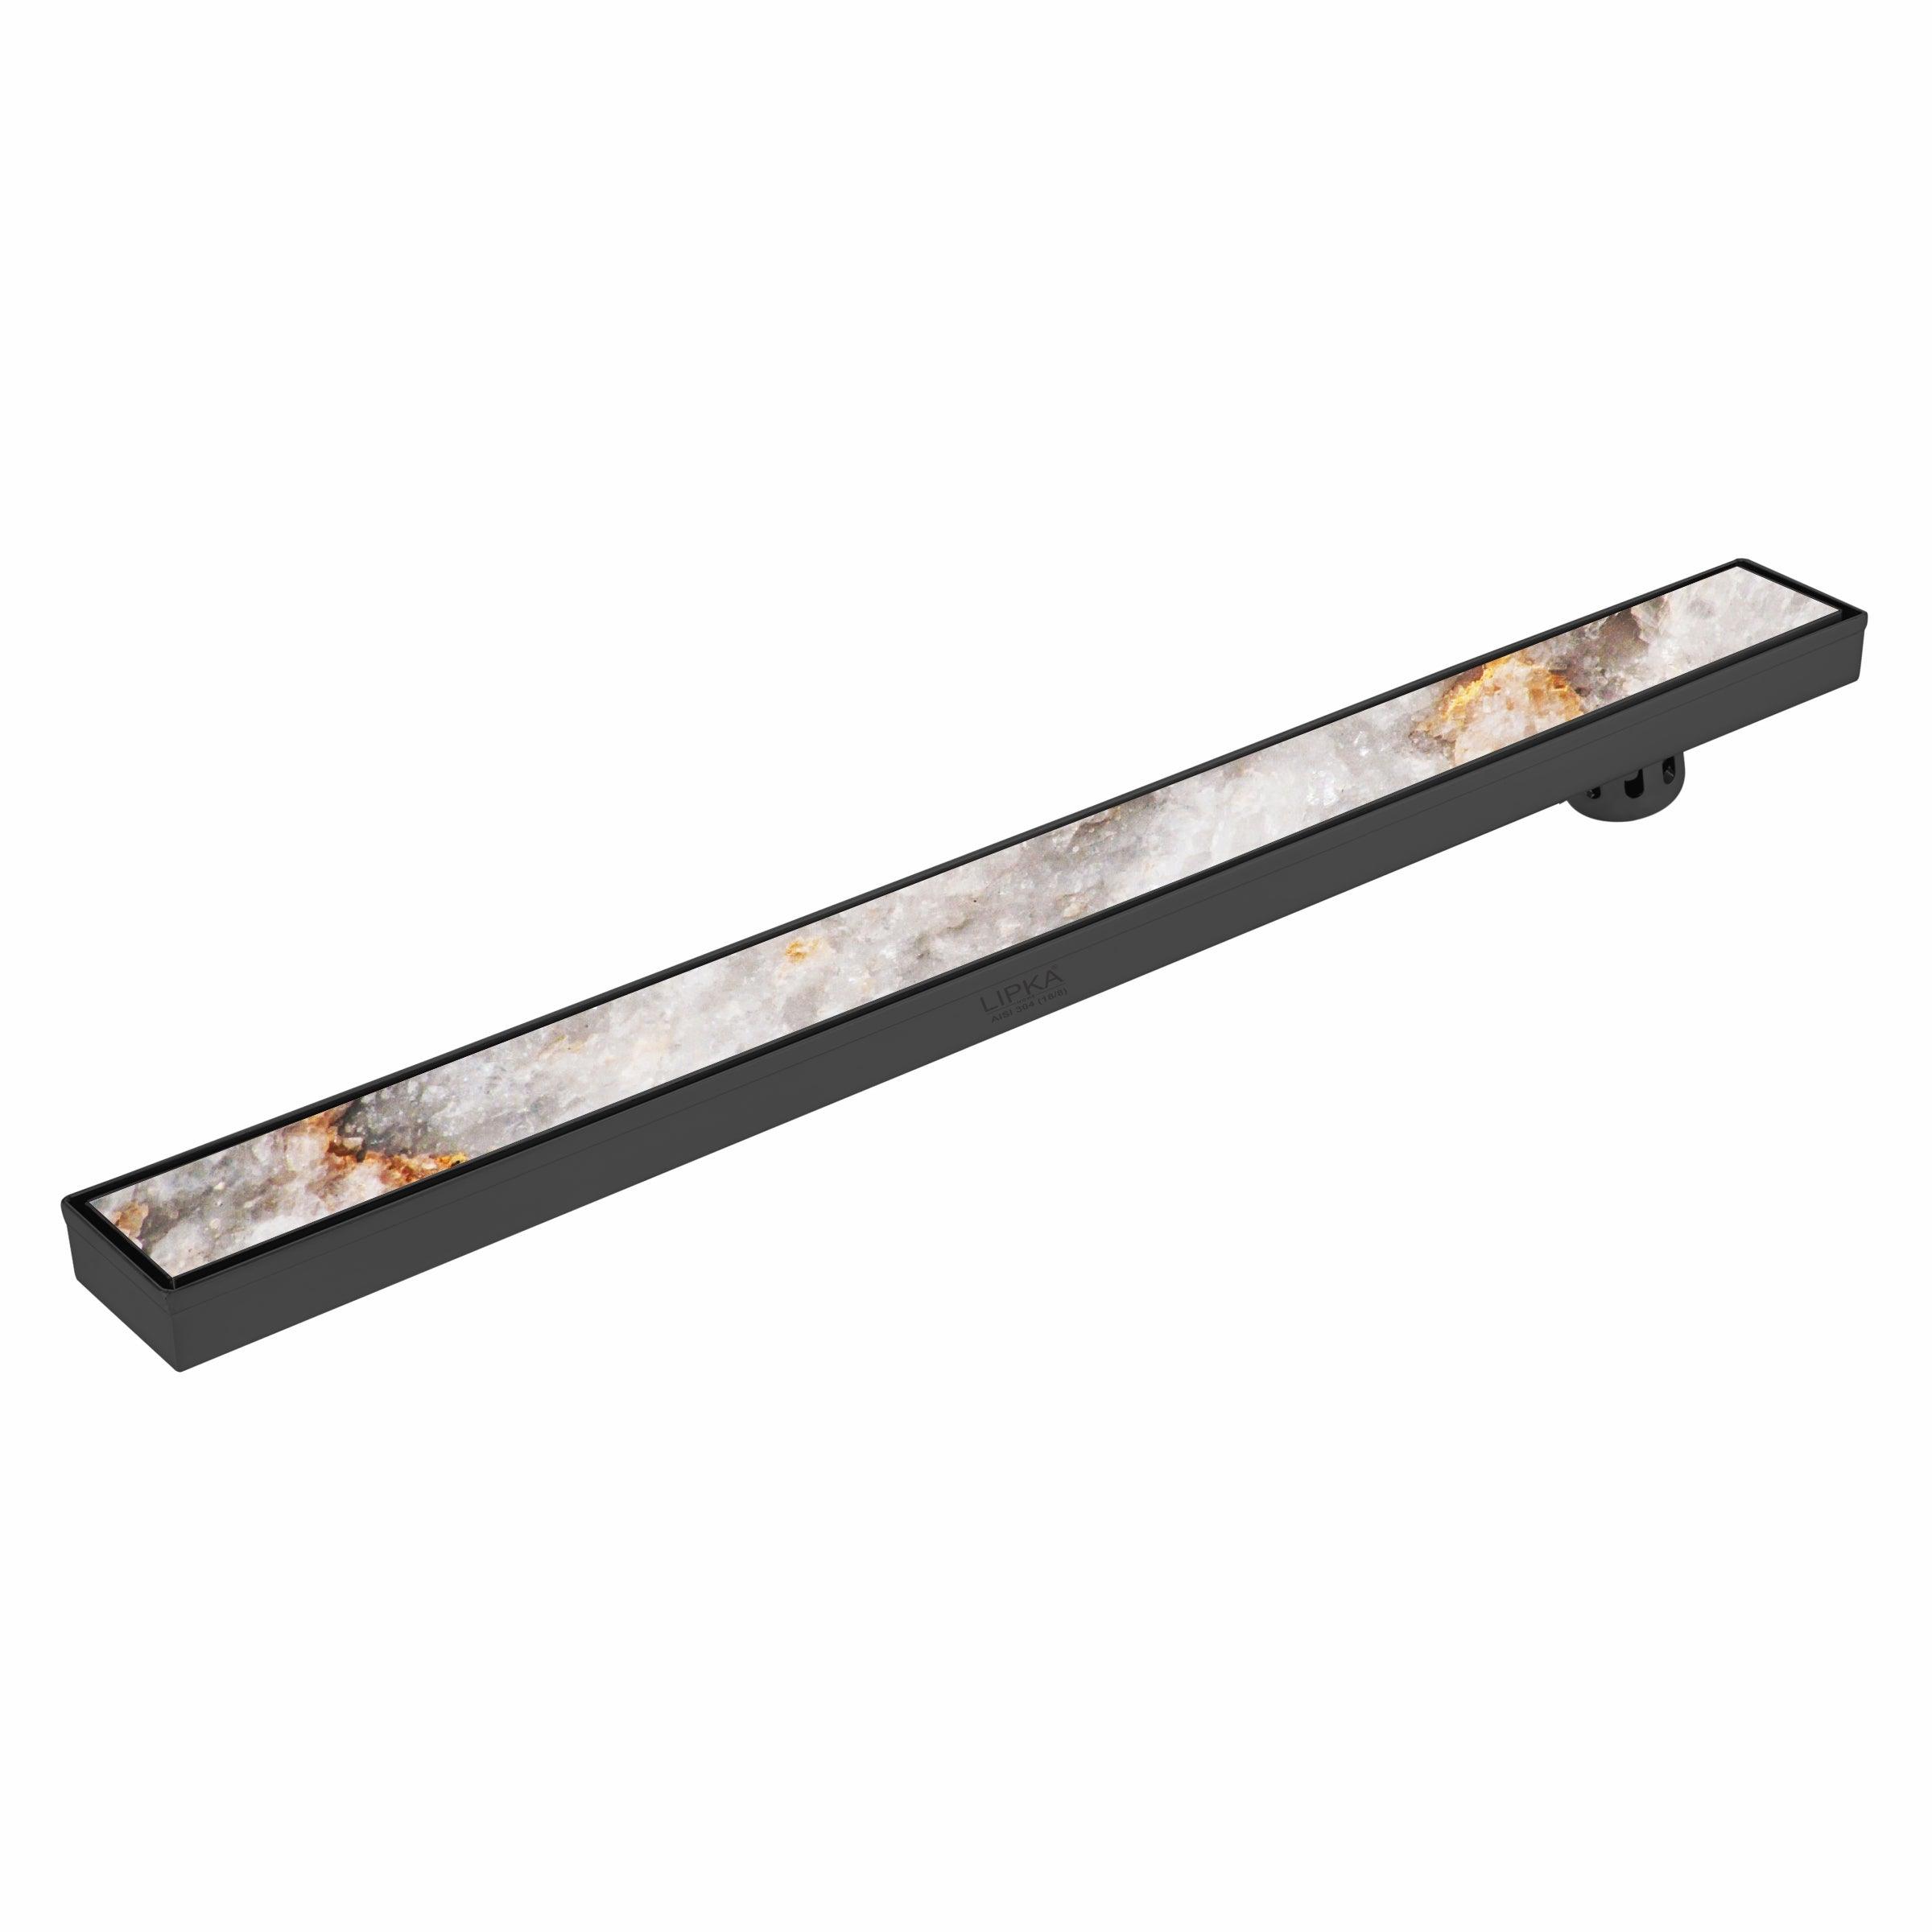 Tile Insert Shower Drain Channel - Black (36 x 3 Inches